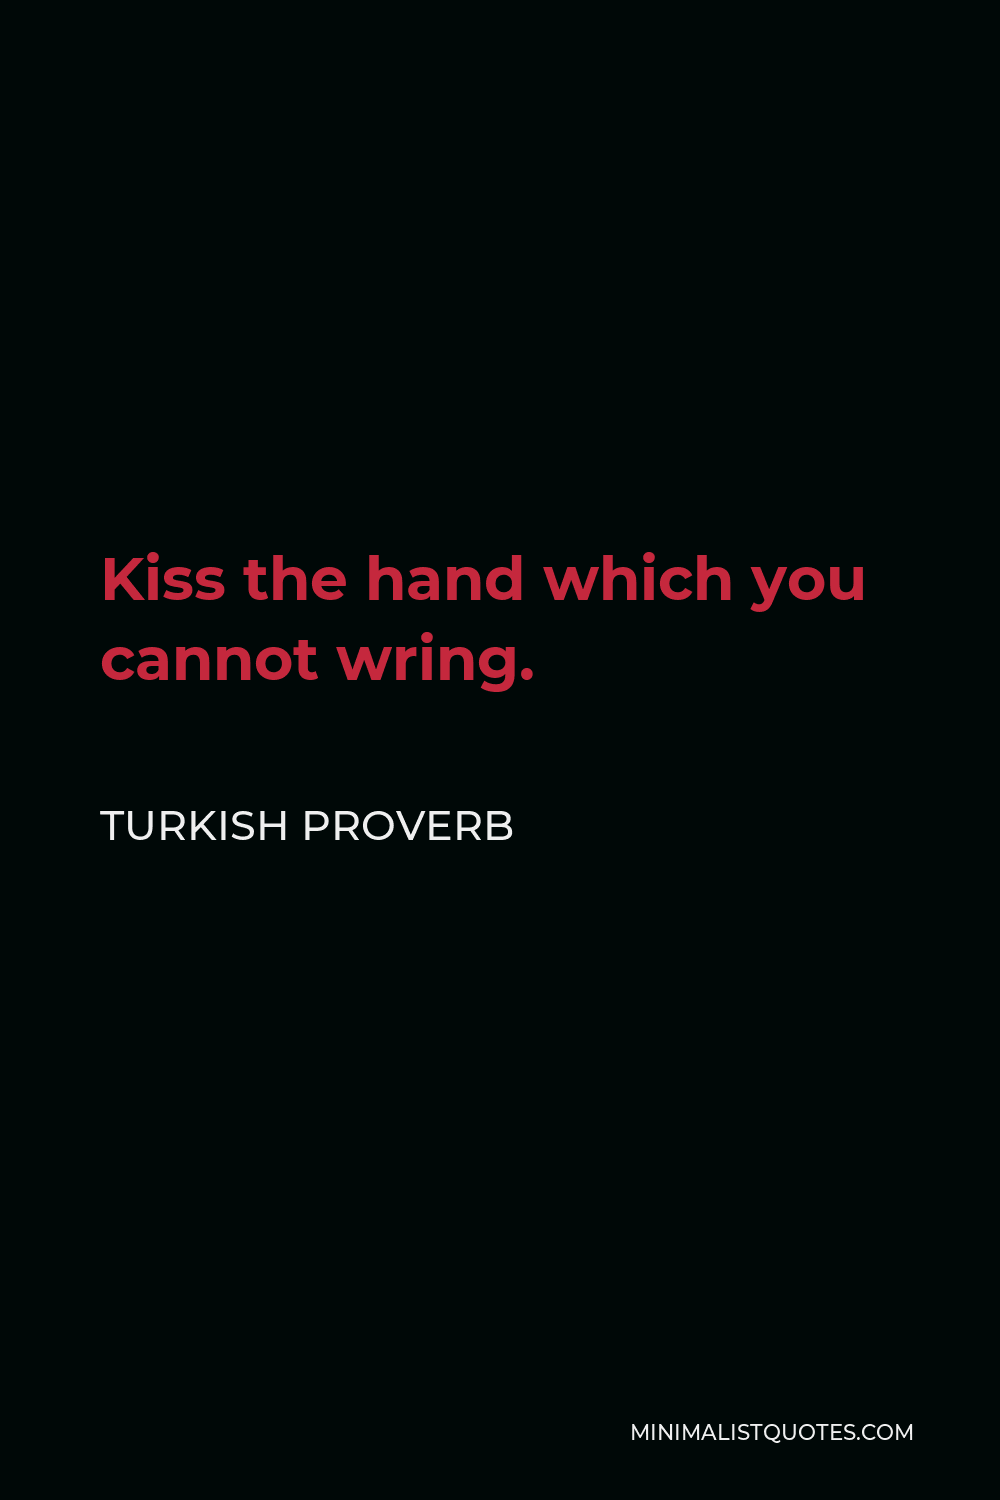 Turkish Proverb Quote - Kiss the hand which you cannot wring.